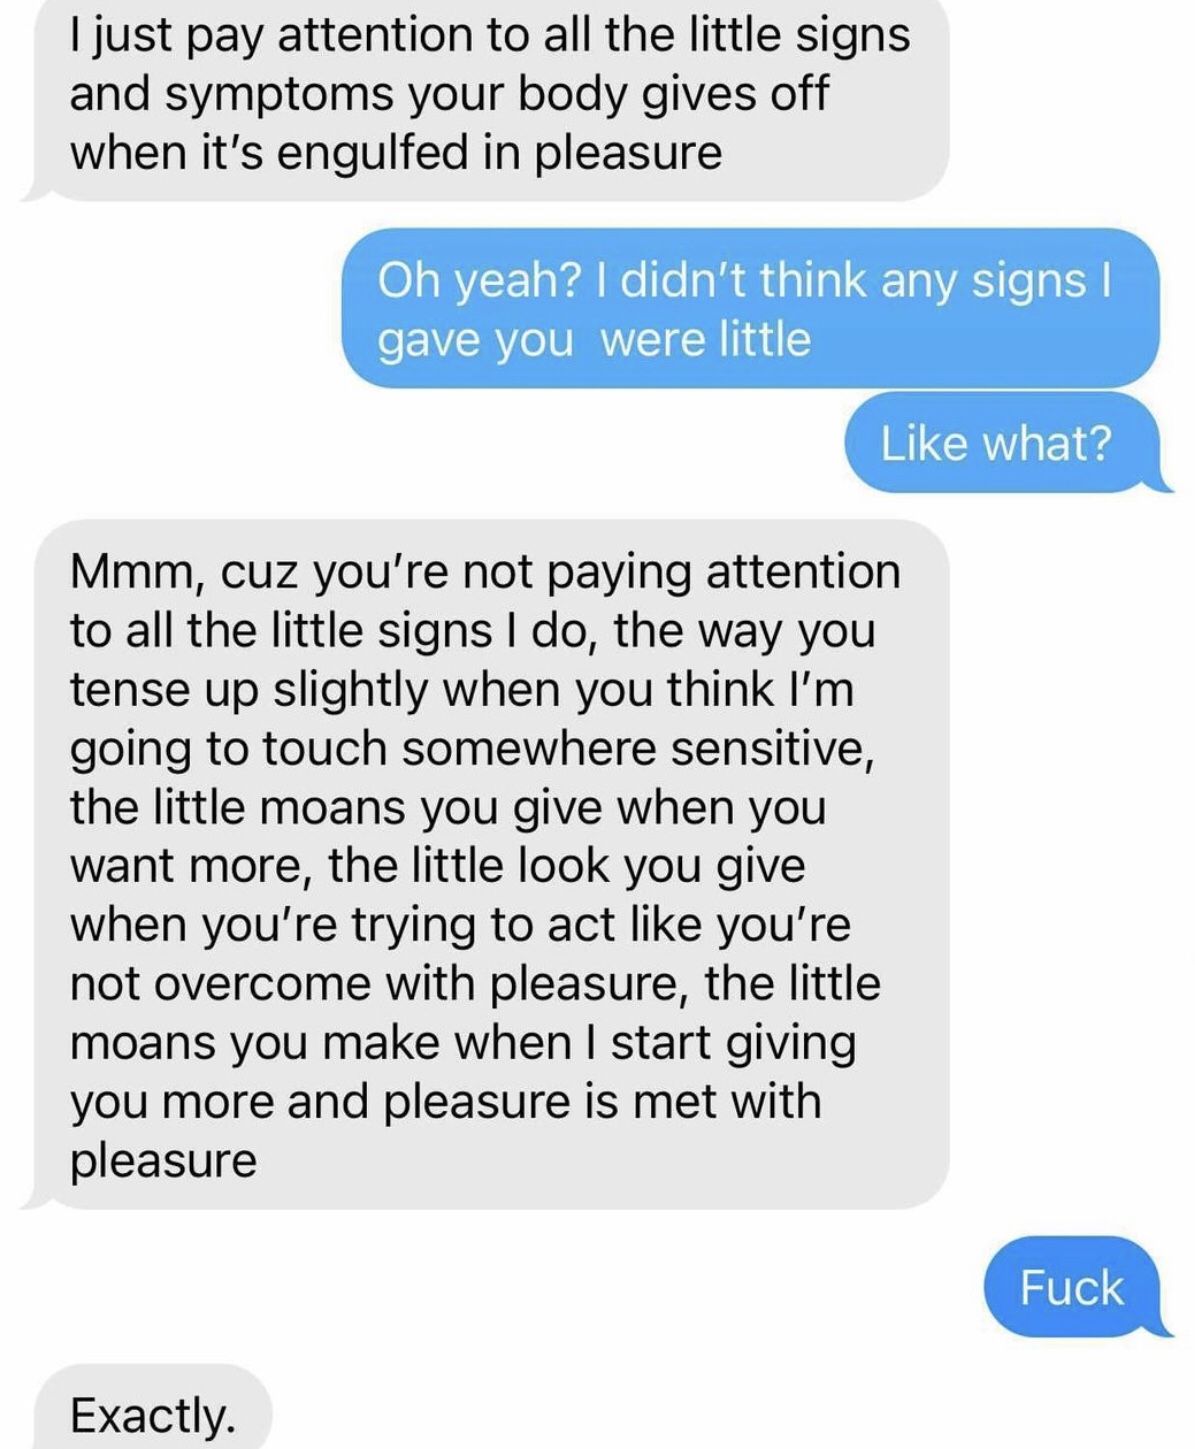 I love engulfing him off in the morning after a night of sex